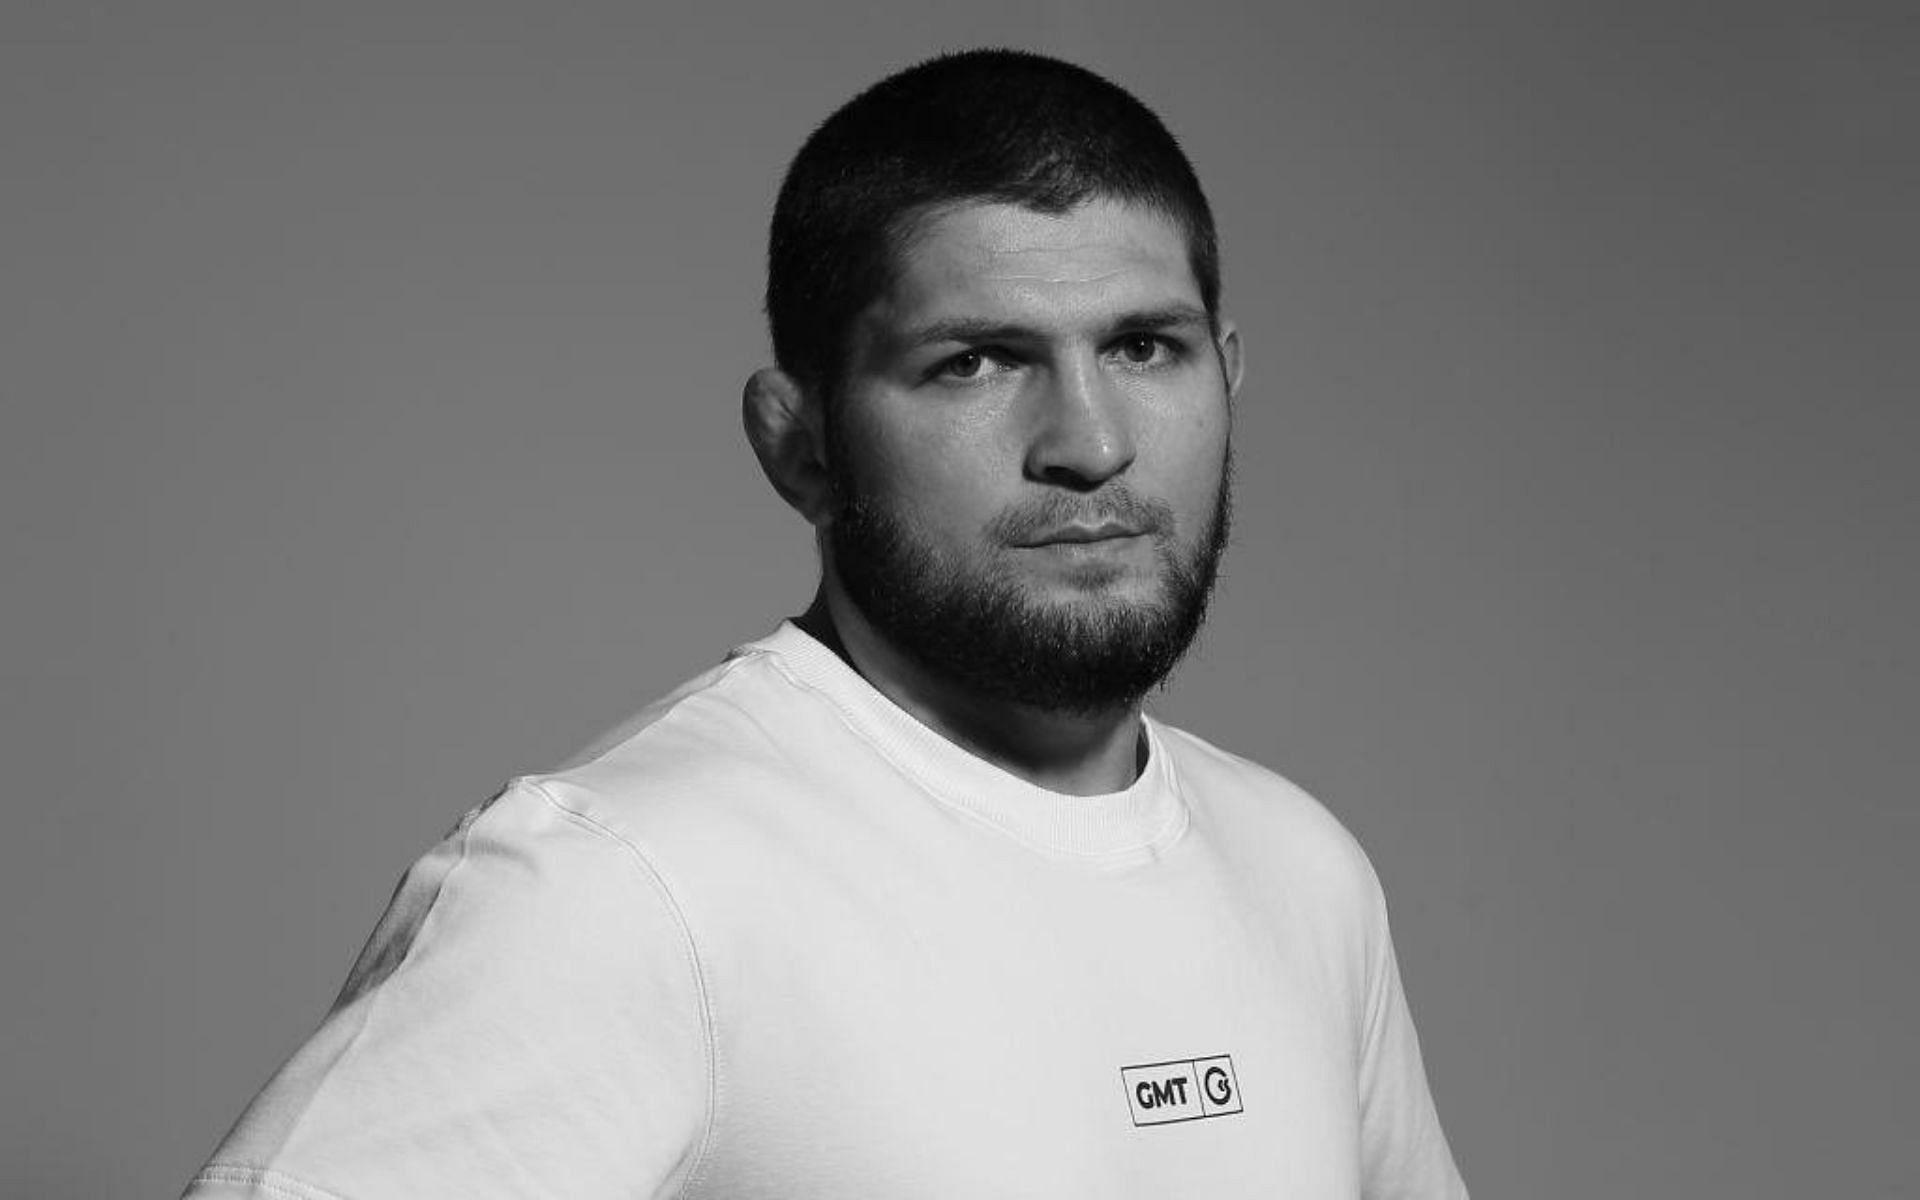 Khabib Nurmagomedov had plenty to say about his sons in a recent interview [Image credit: @TeamKhabib on Twitter]